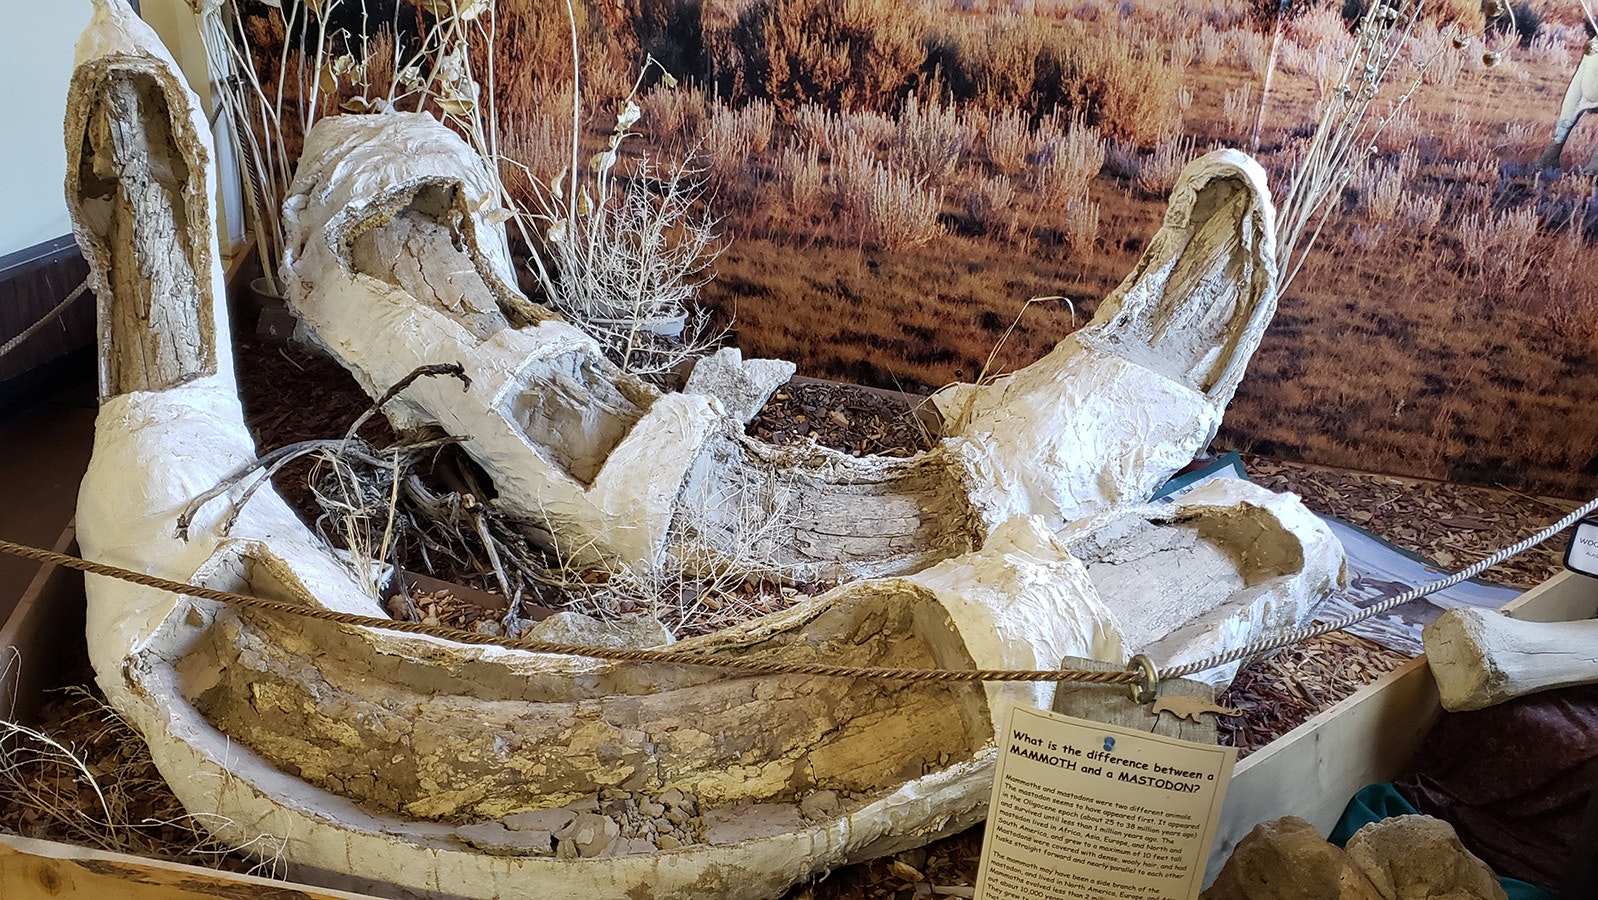 These juvenile mammoth tusks are among artifacts on display inside the YMCA at Sunrise, which will be restored and given to a museum.